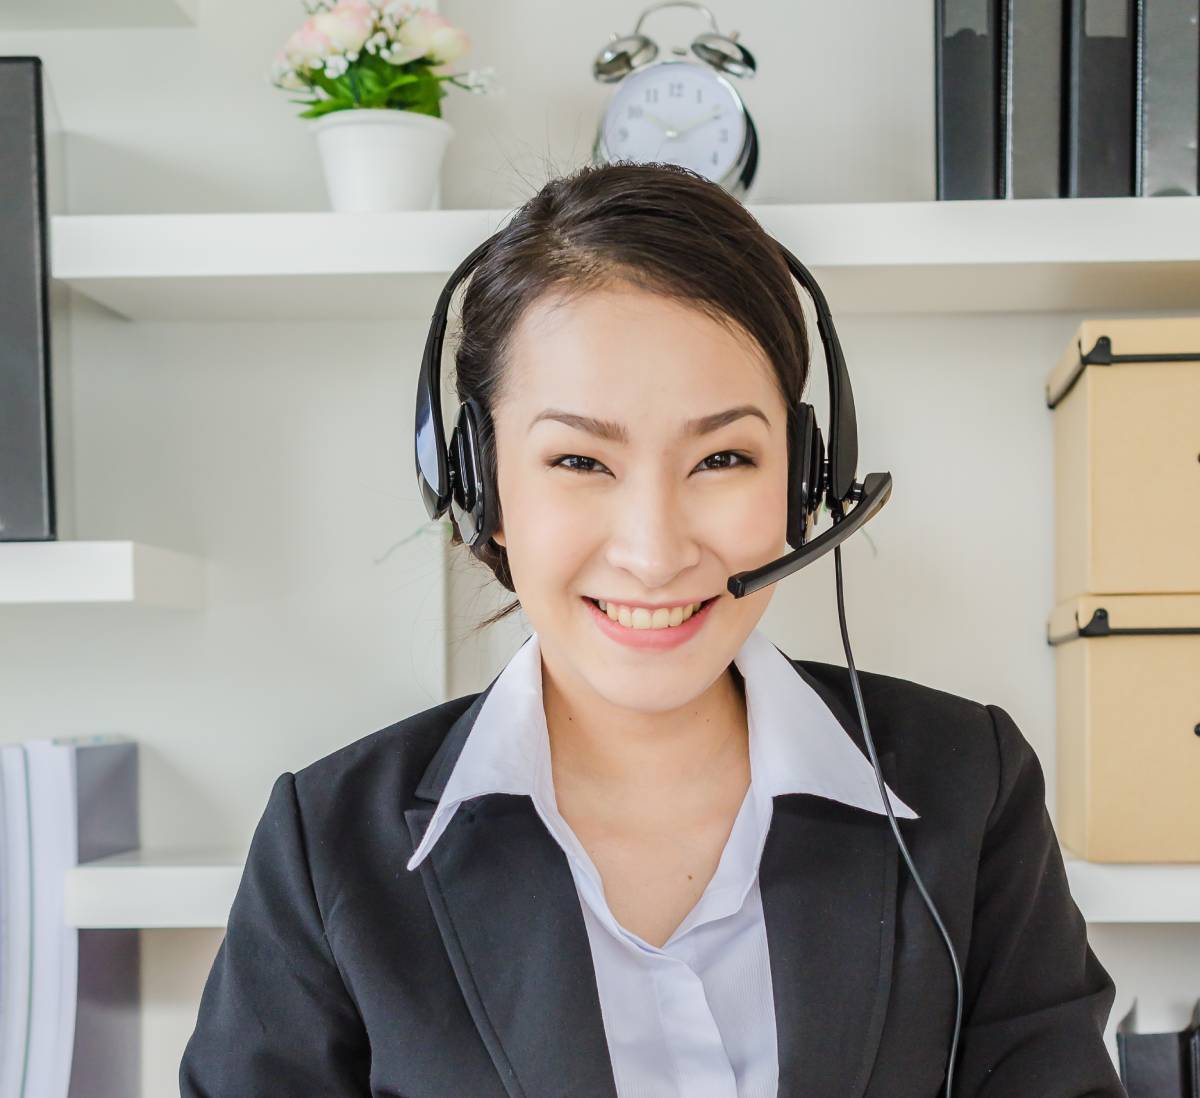 A businesswoman using a headset to communicate with customers